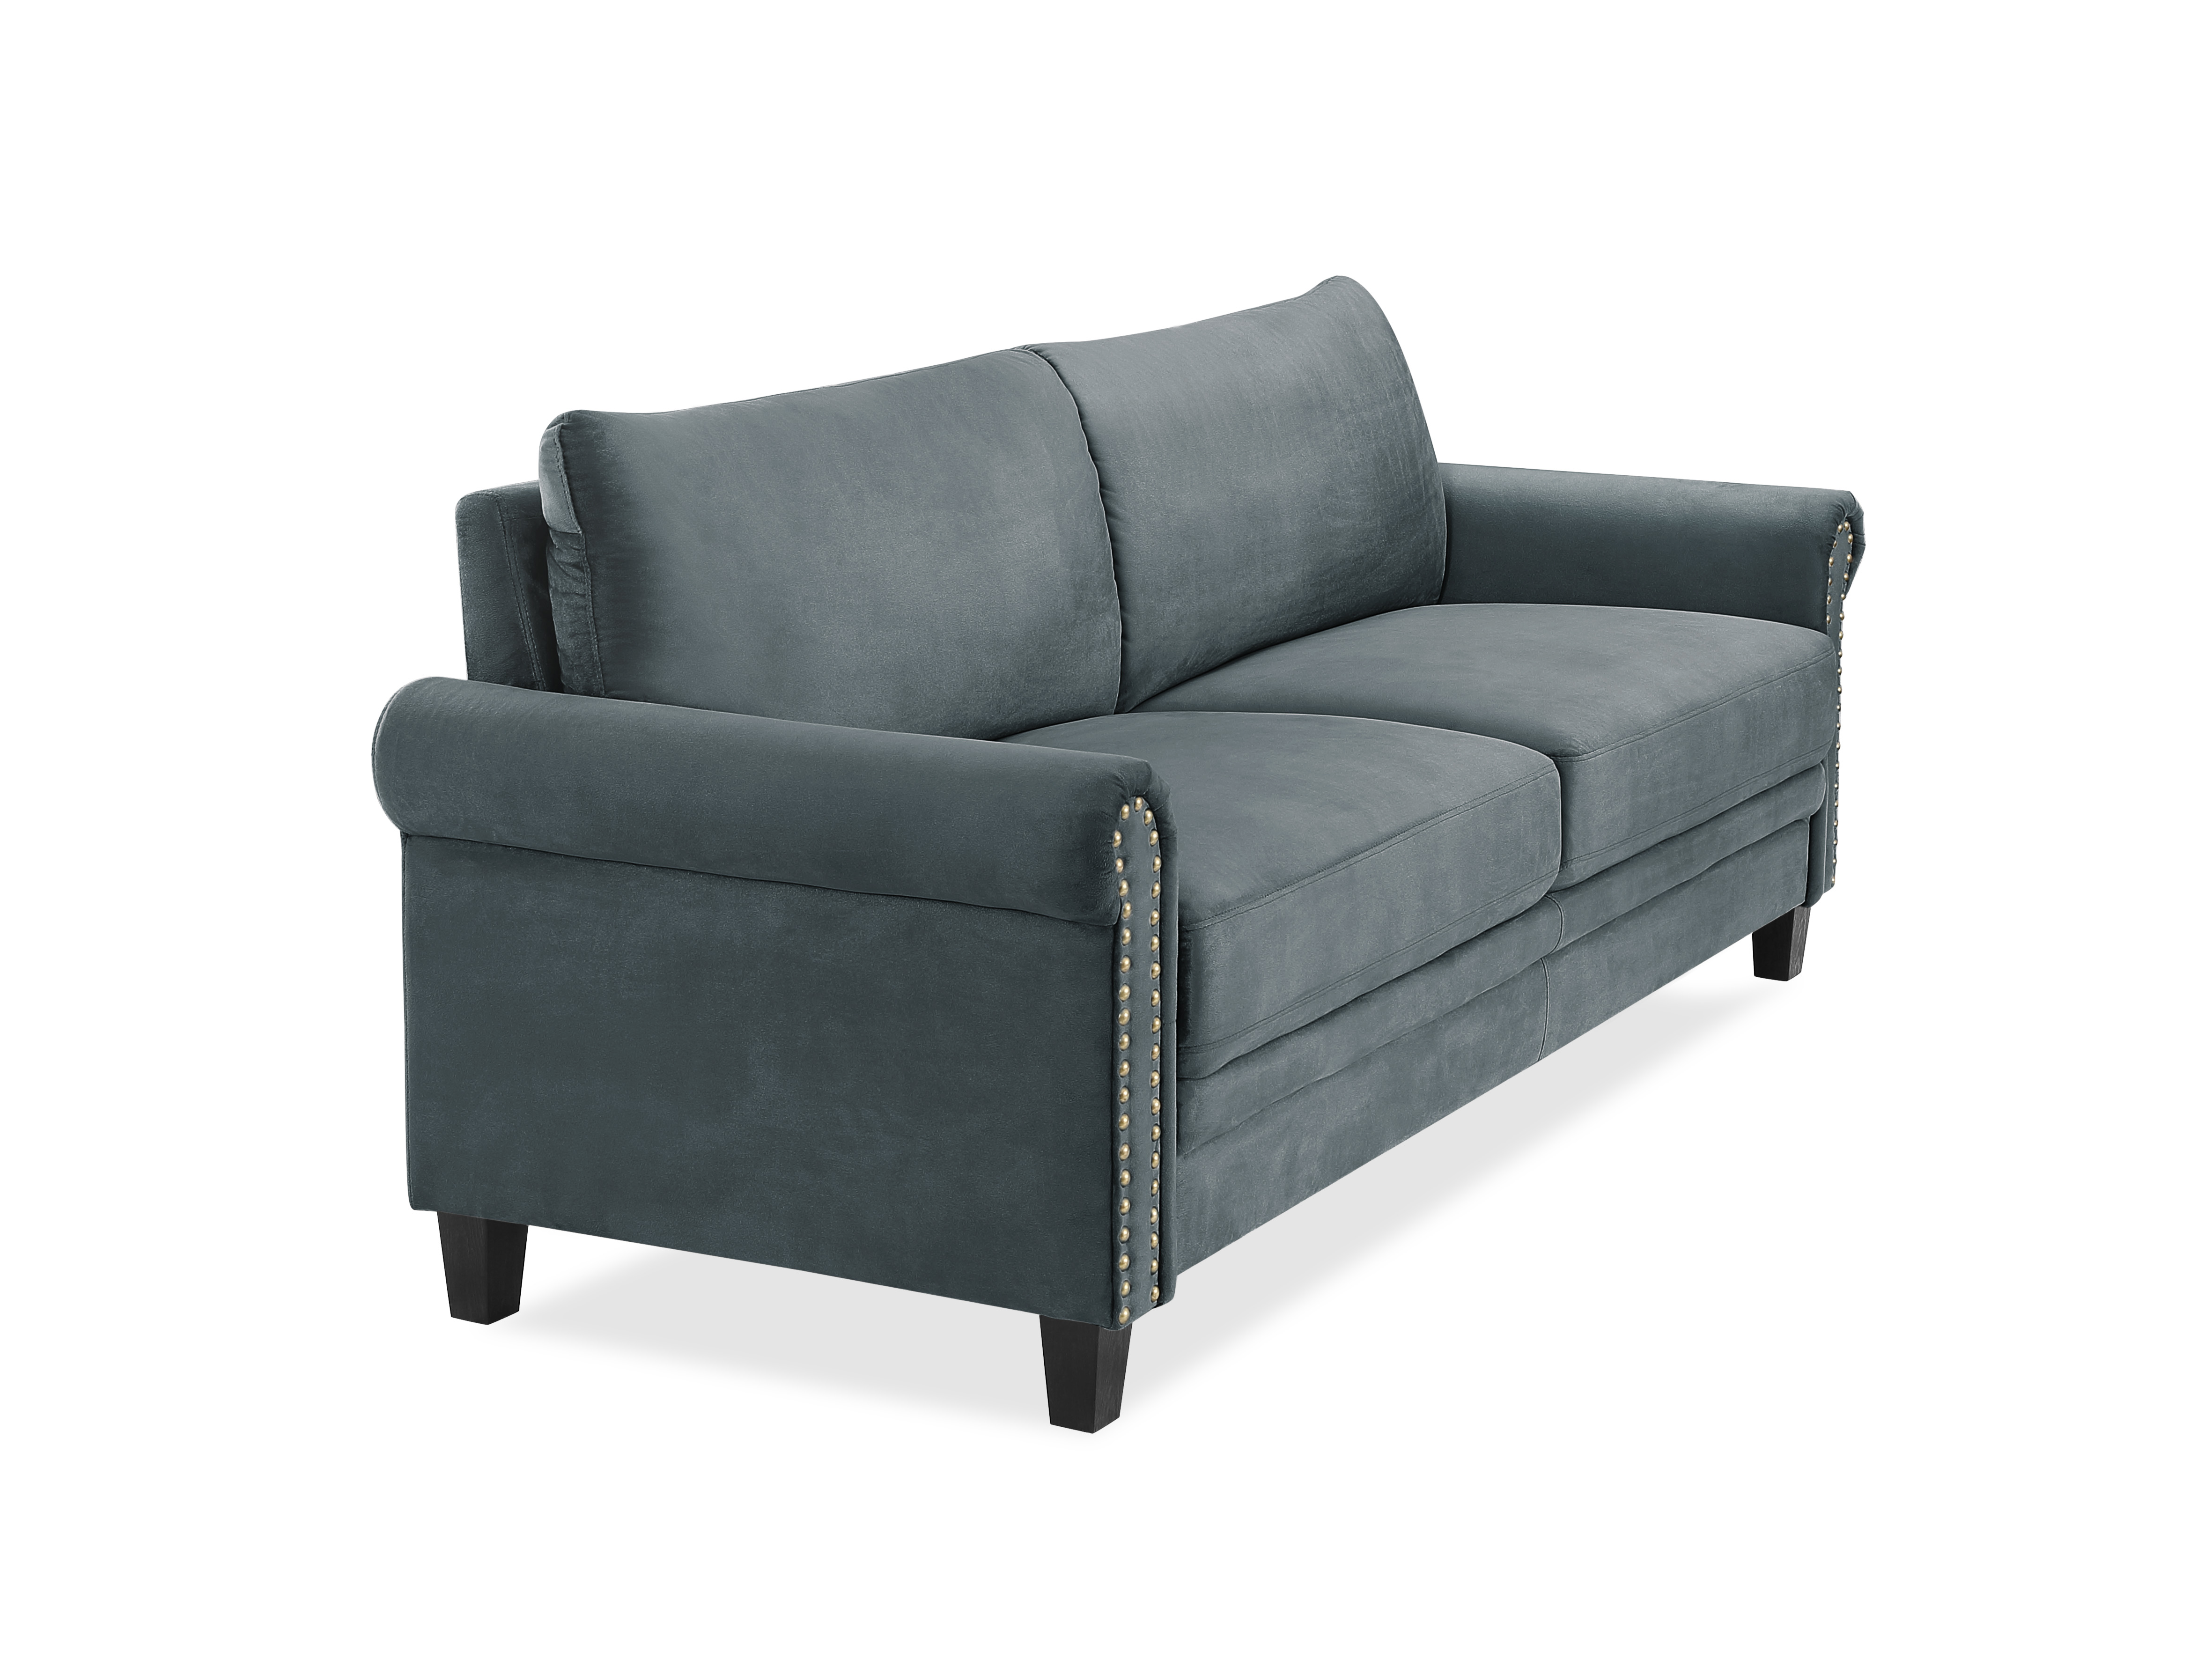 Lifestyle Solutions Fallon Rolled Arms Sofa, Gray Fabric - image 3 of 9